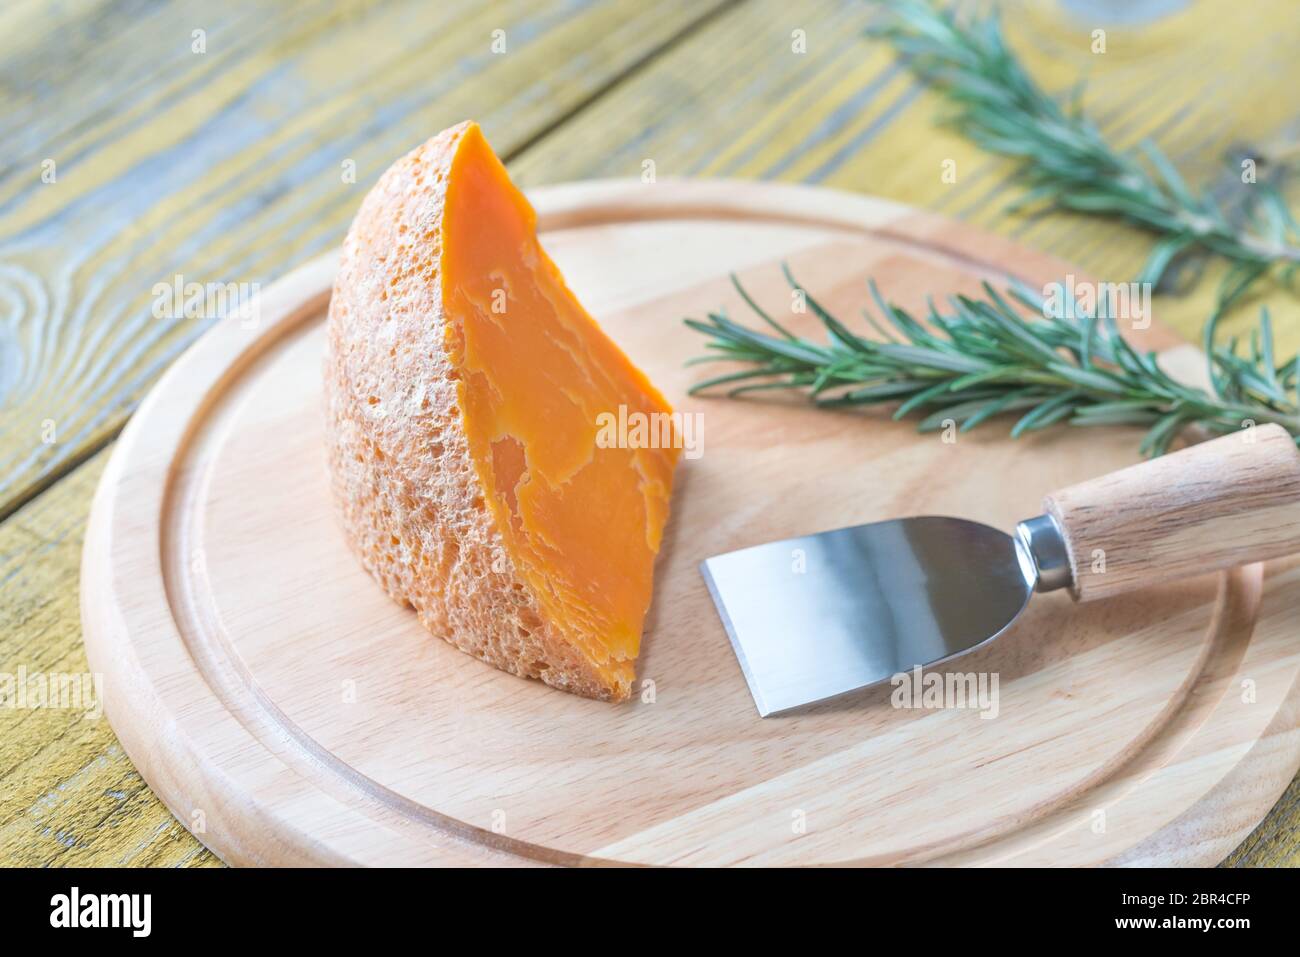 Wedge of Mimolette cheese on the wooden board Stock Photo